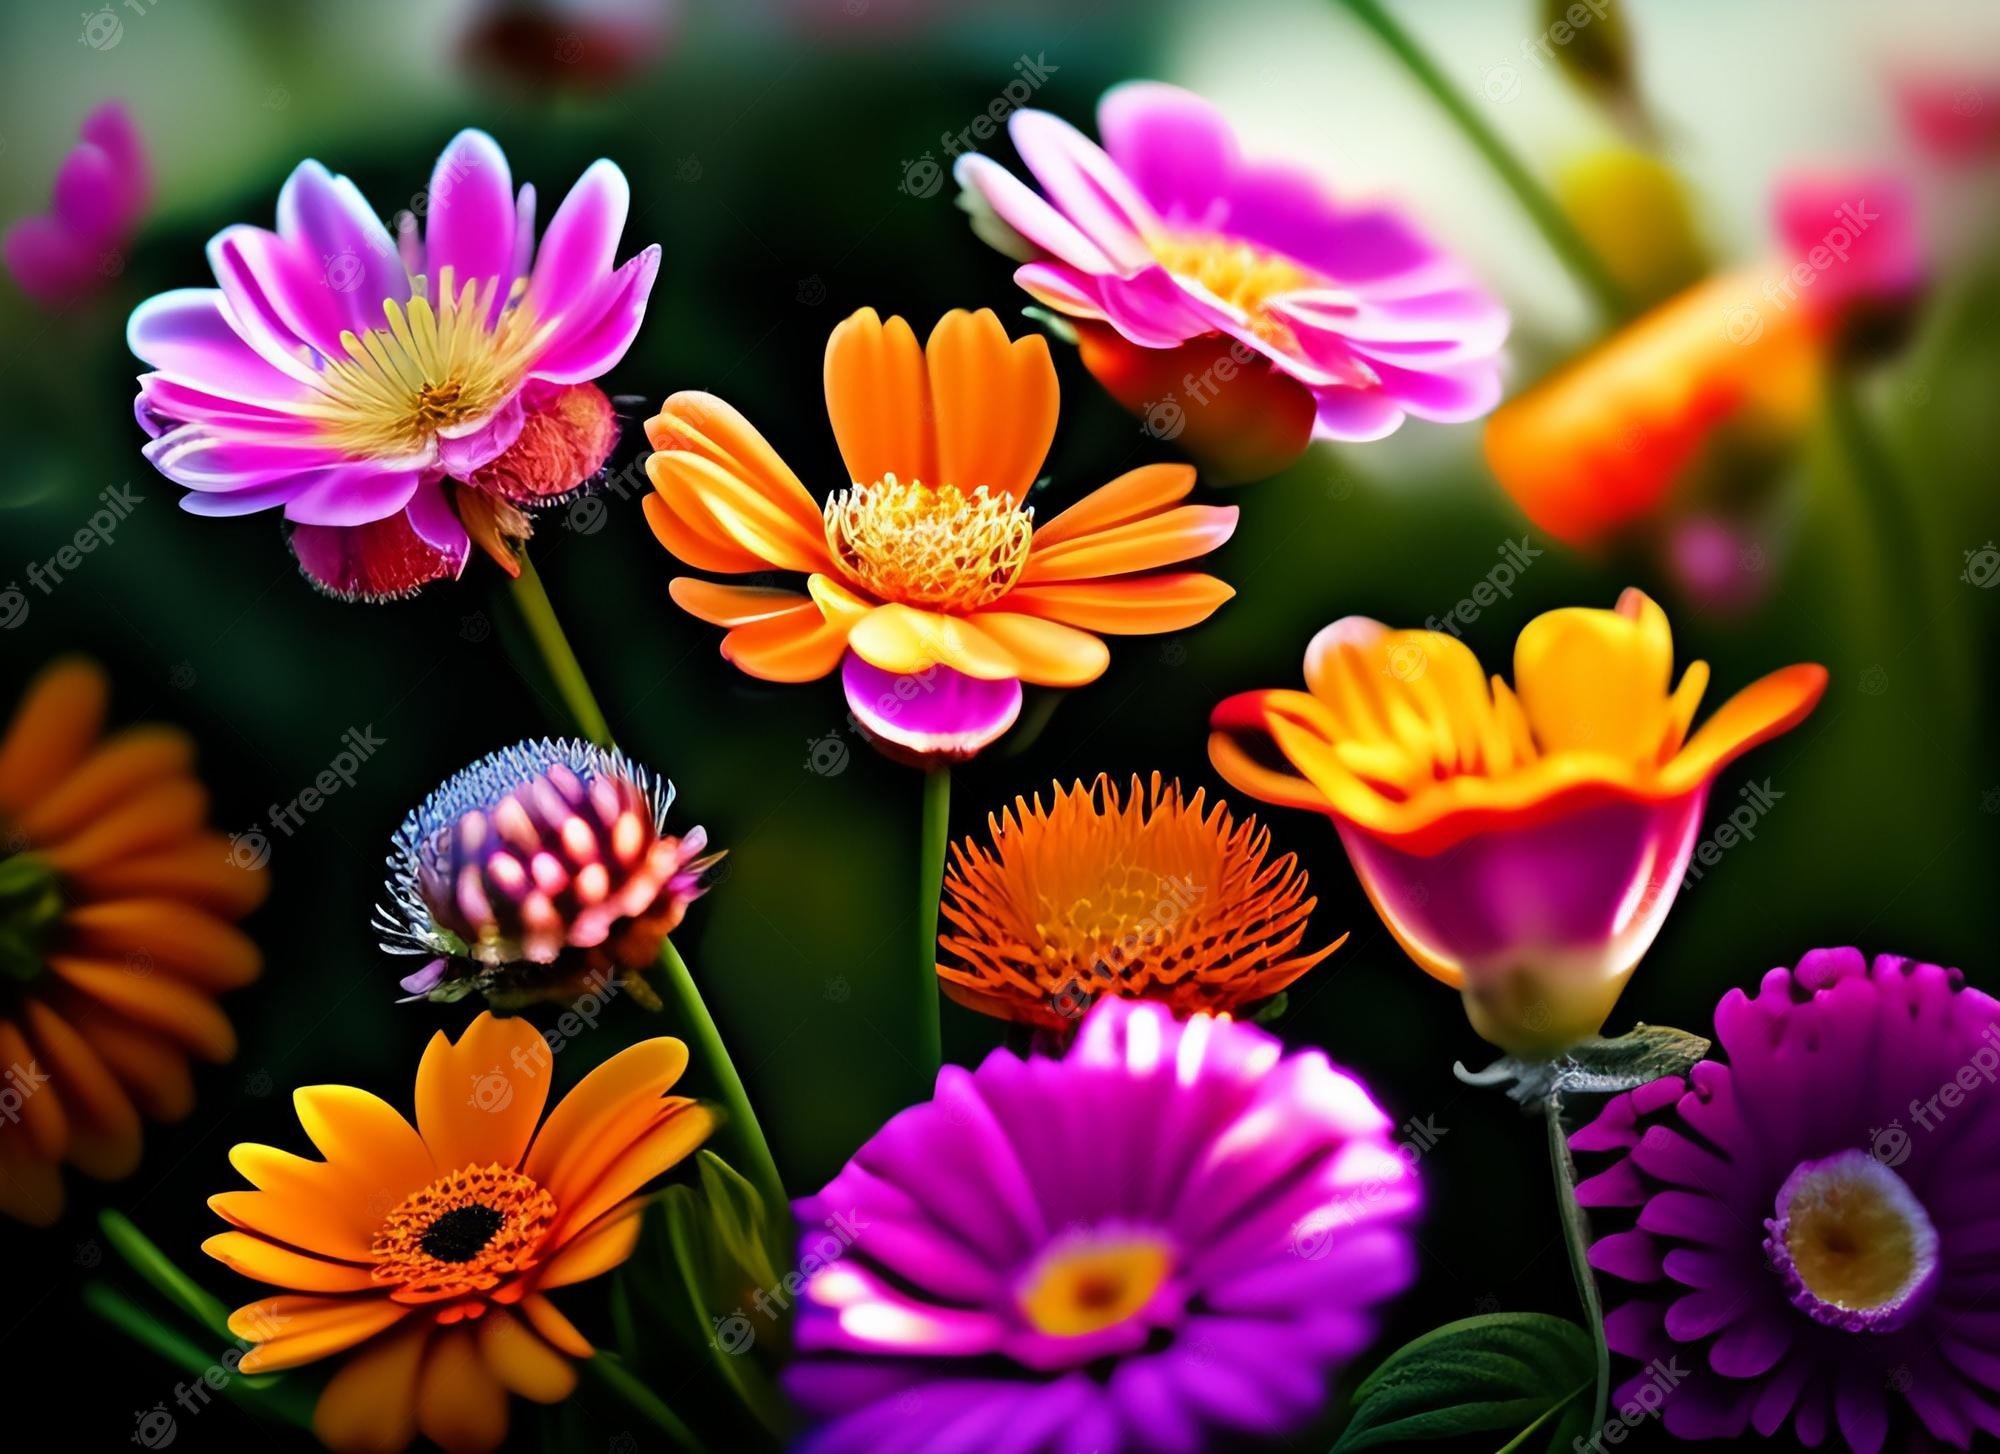 Colorful Flowers Image